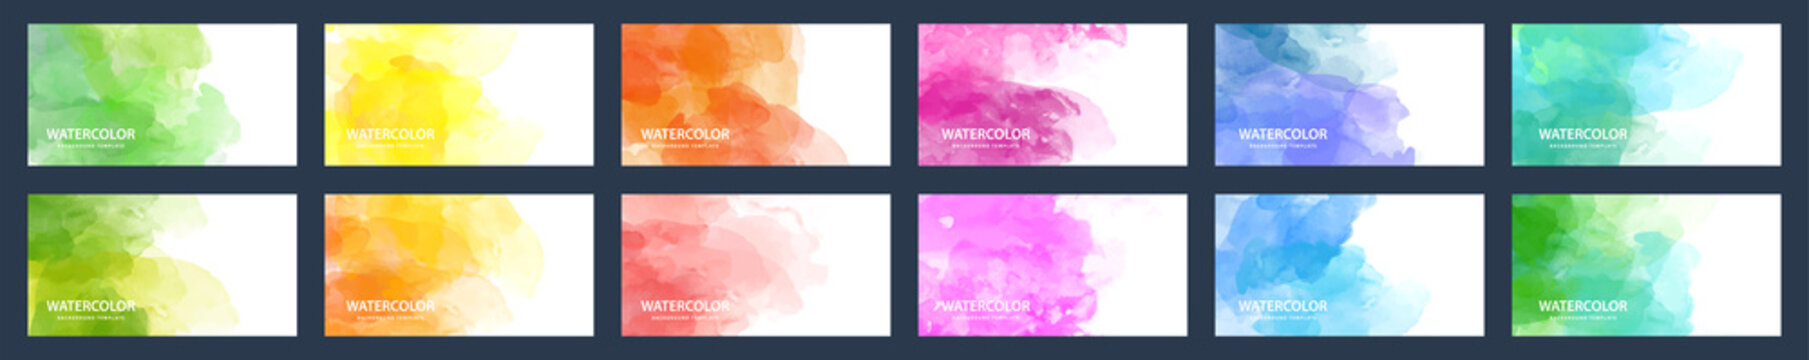 Big set of beauty vector colorful watercolor backgrounds for business card, brochure or flyer